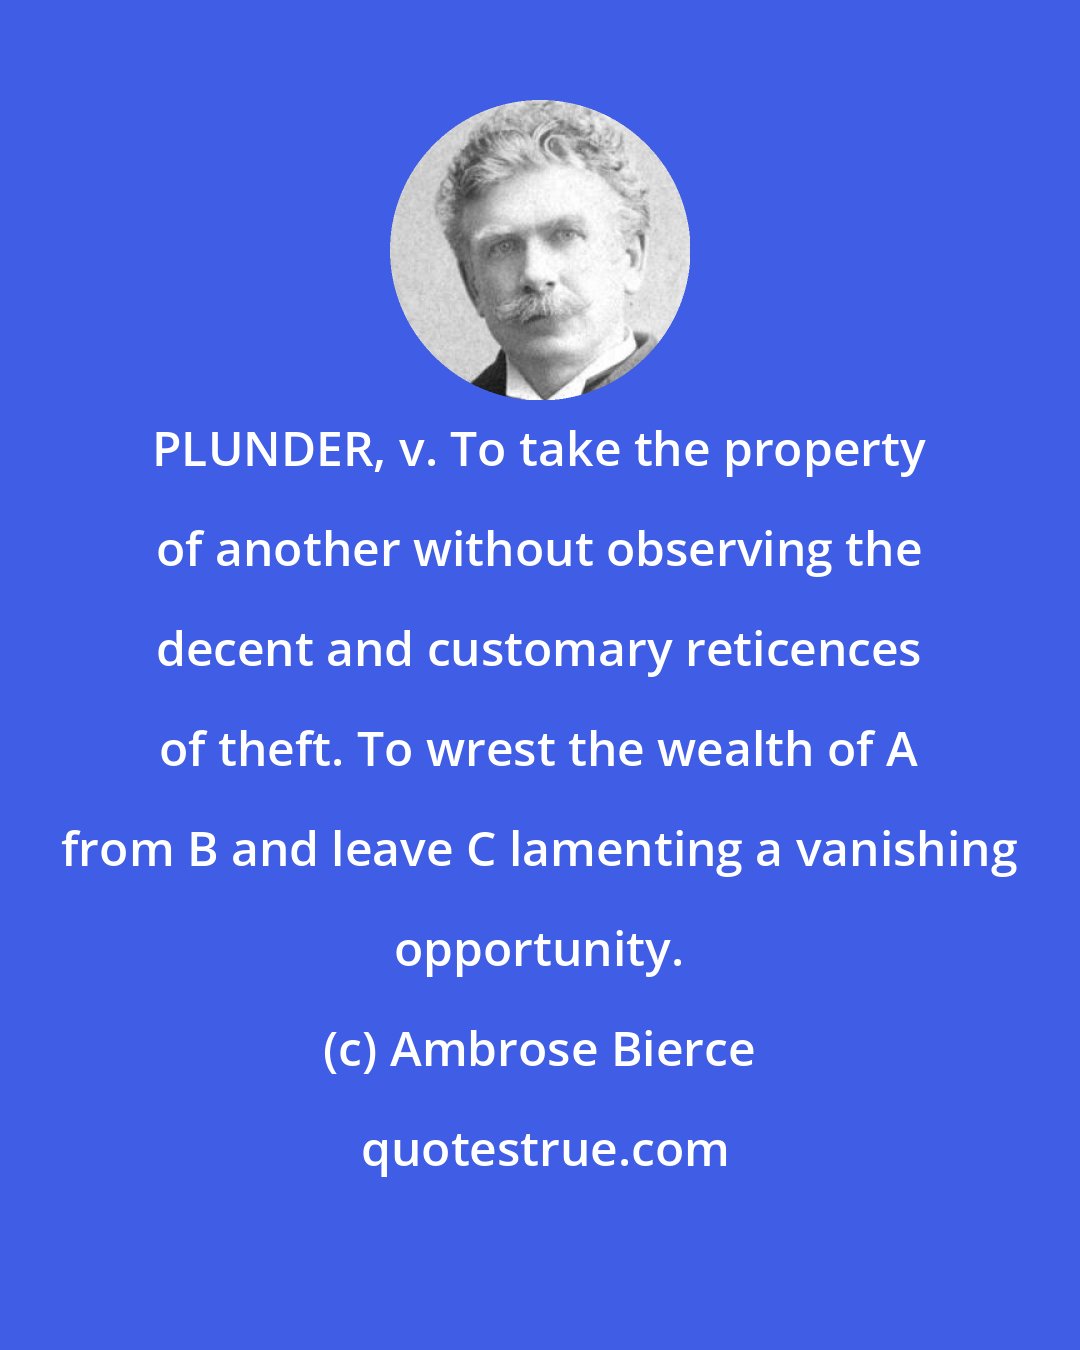 Ambrose Bierce: PLUNDER, v. To take the property of another without observing the decent and customary reticences of theft. To wrest the wealth of A from B and leave C lamenting a vanishing opportunity.